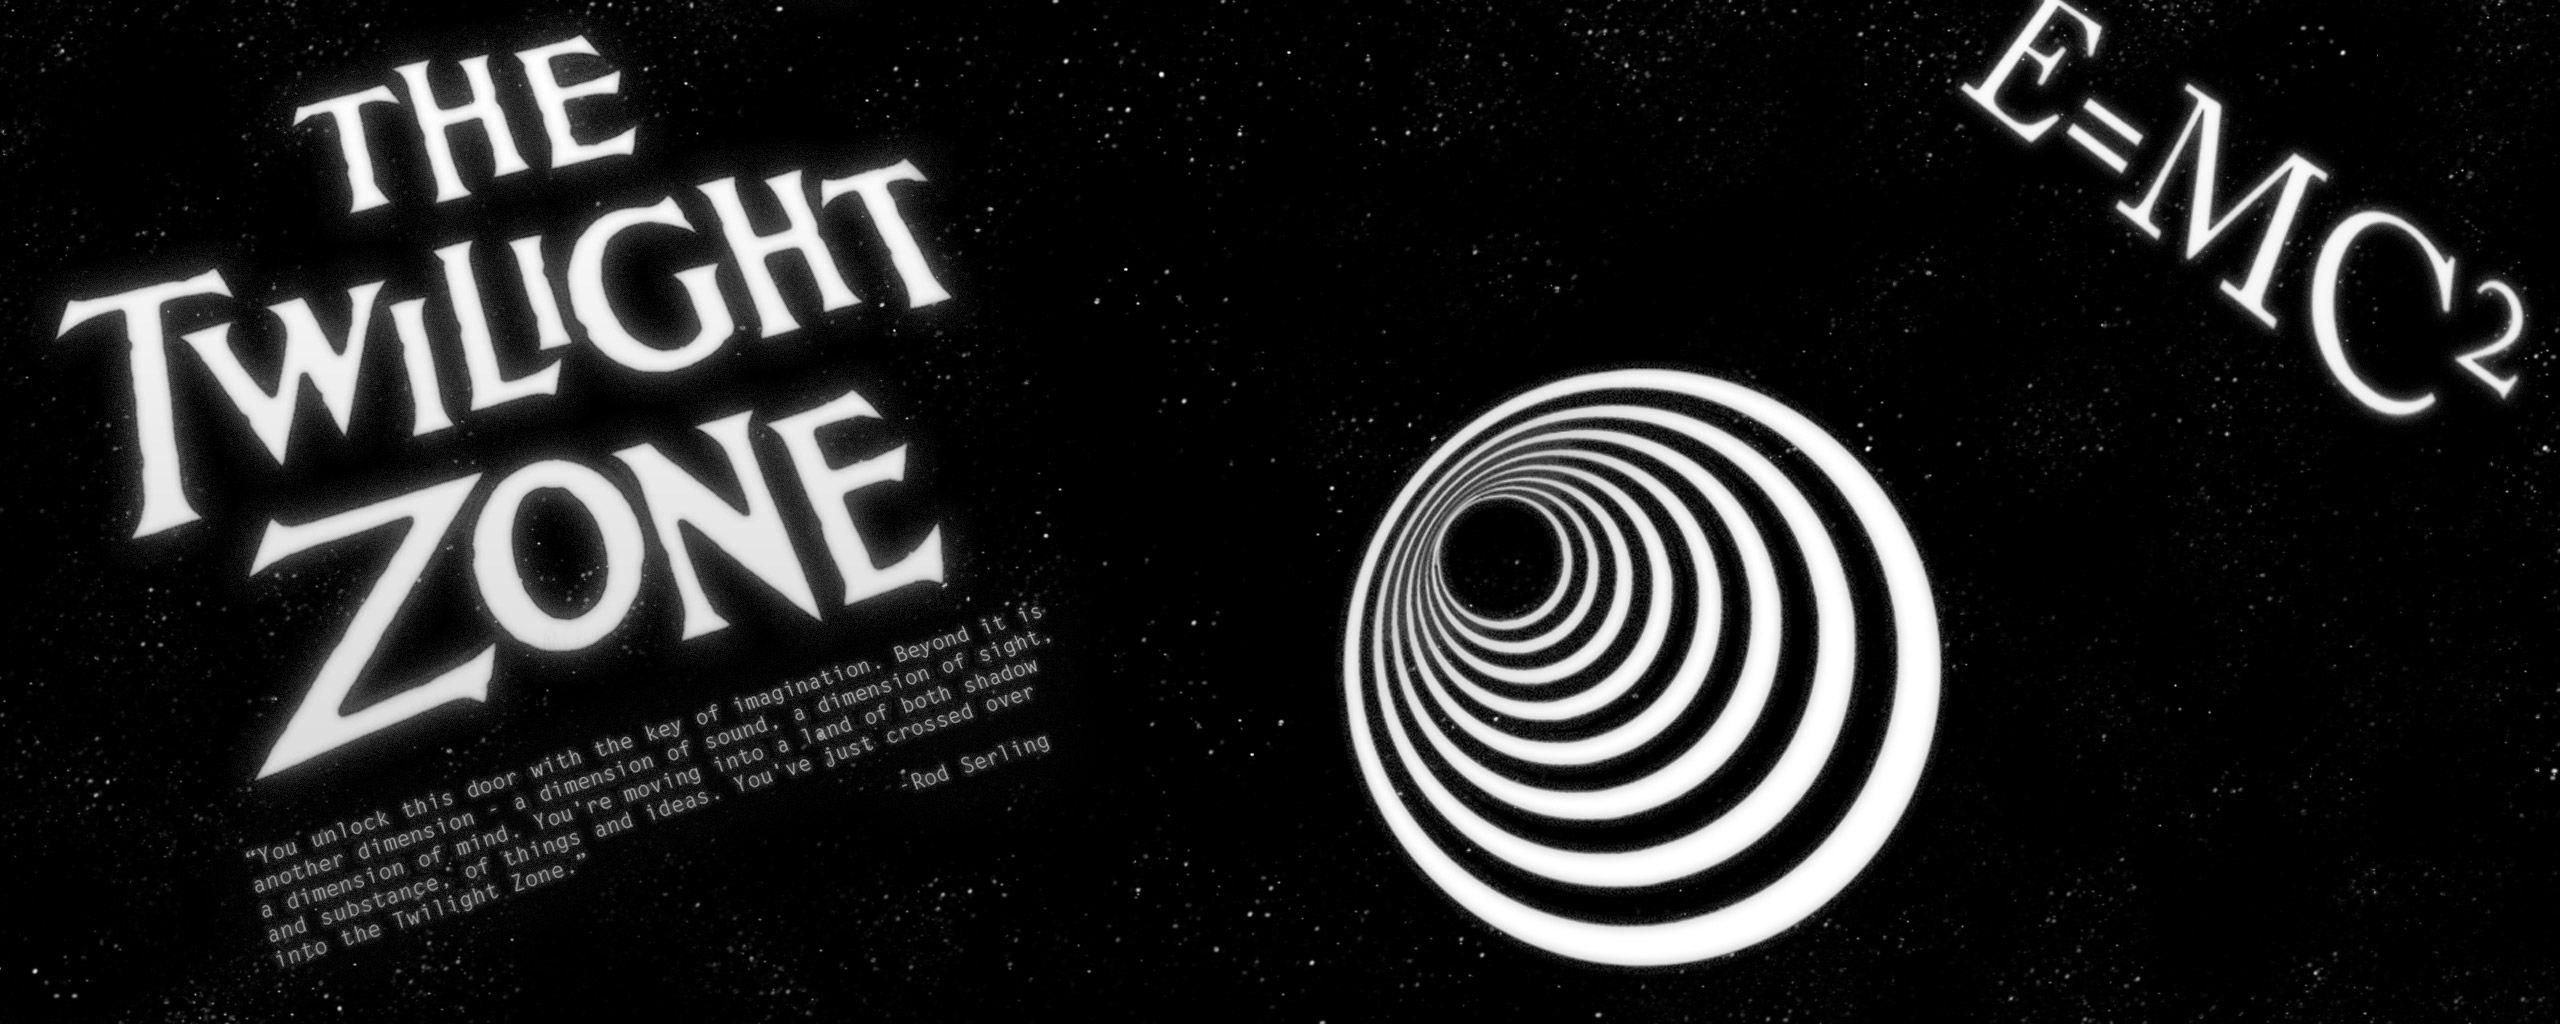 twilight zone Wallpapers and Backgrounds Image